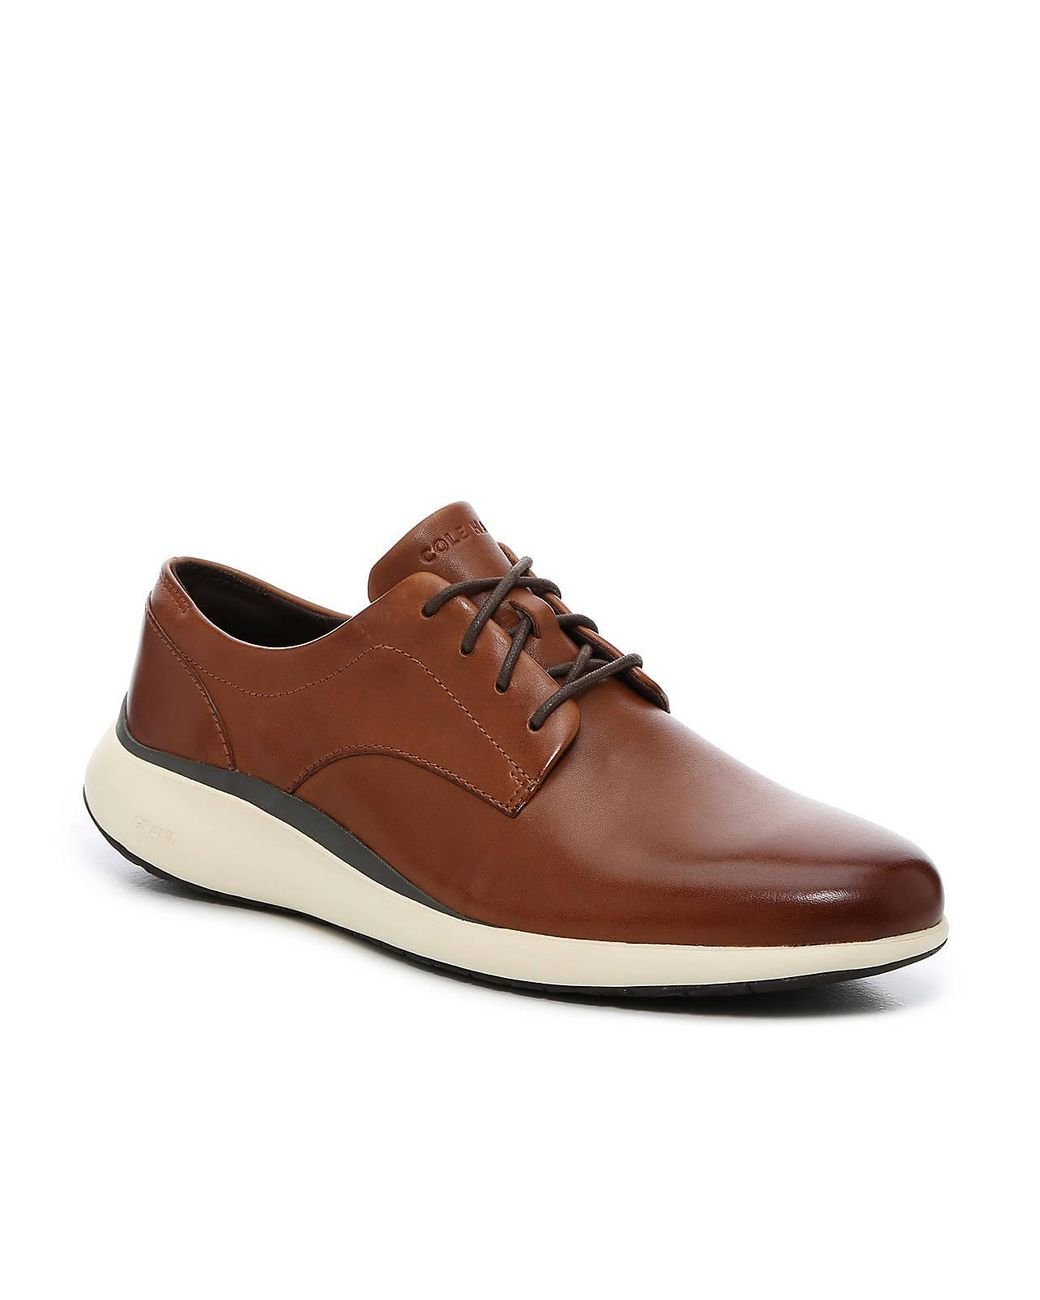 Cole Haan Leather Grand Troy Oxford in Cognac (Brown) for Men - Lyst